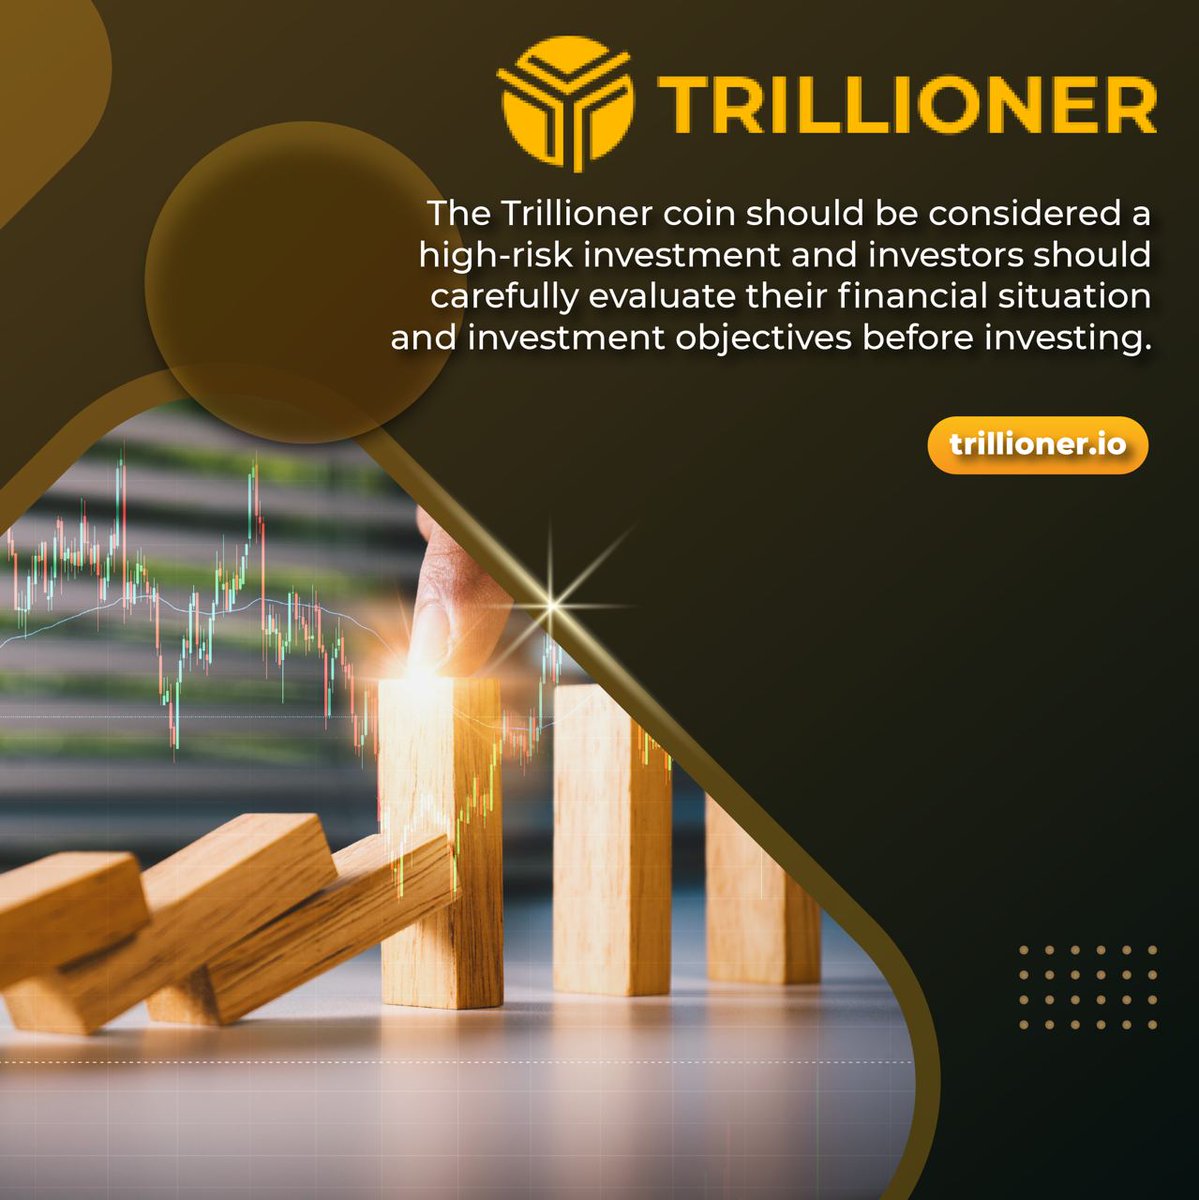 The Trillioner coin should be considered a high-risk investment and investors should carefully evaluate their financial situation and investment objectives before investing. 

#Trillioner #TLC #cryptotrading #CryptoNews